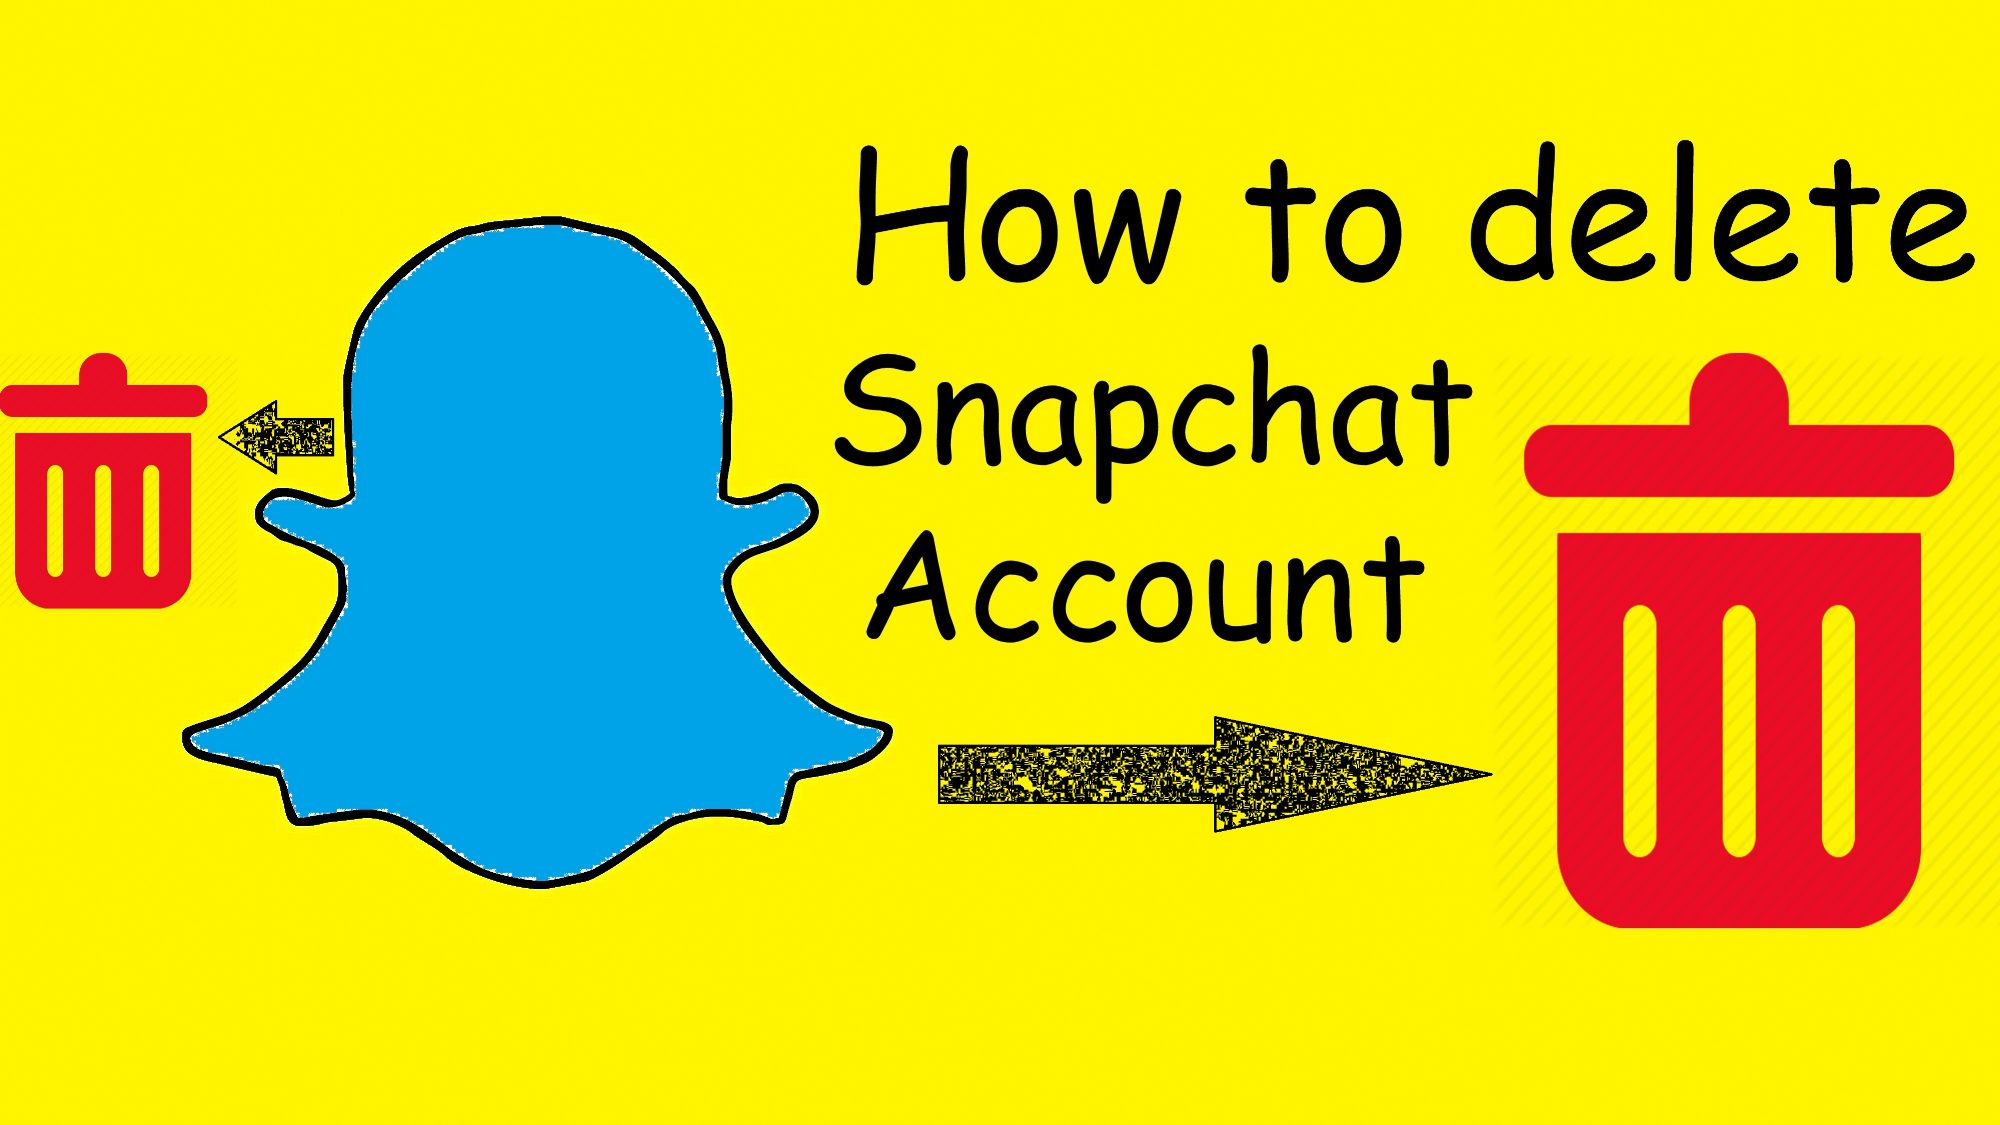 how to delete snapchat account on android